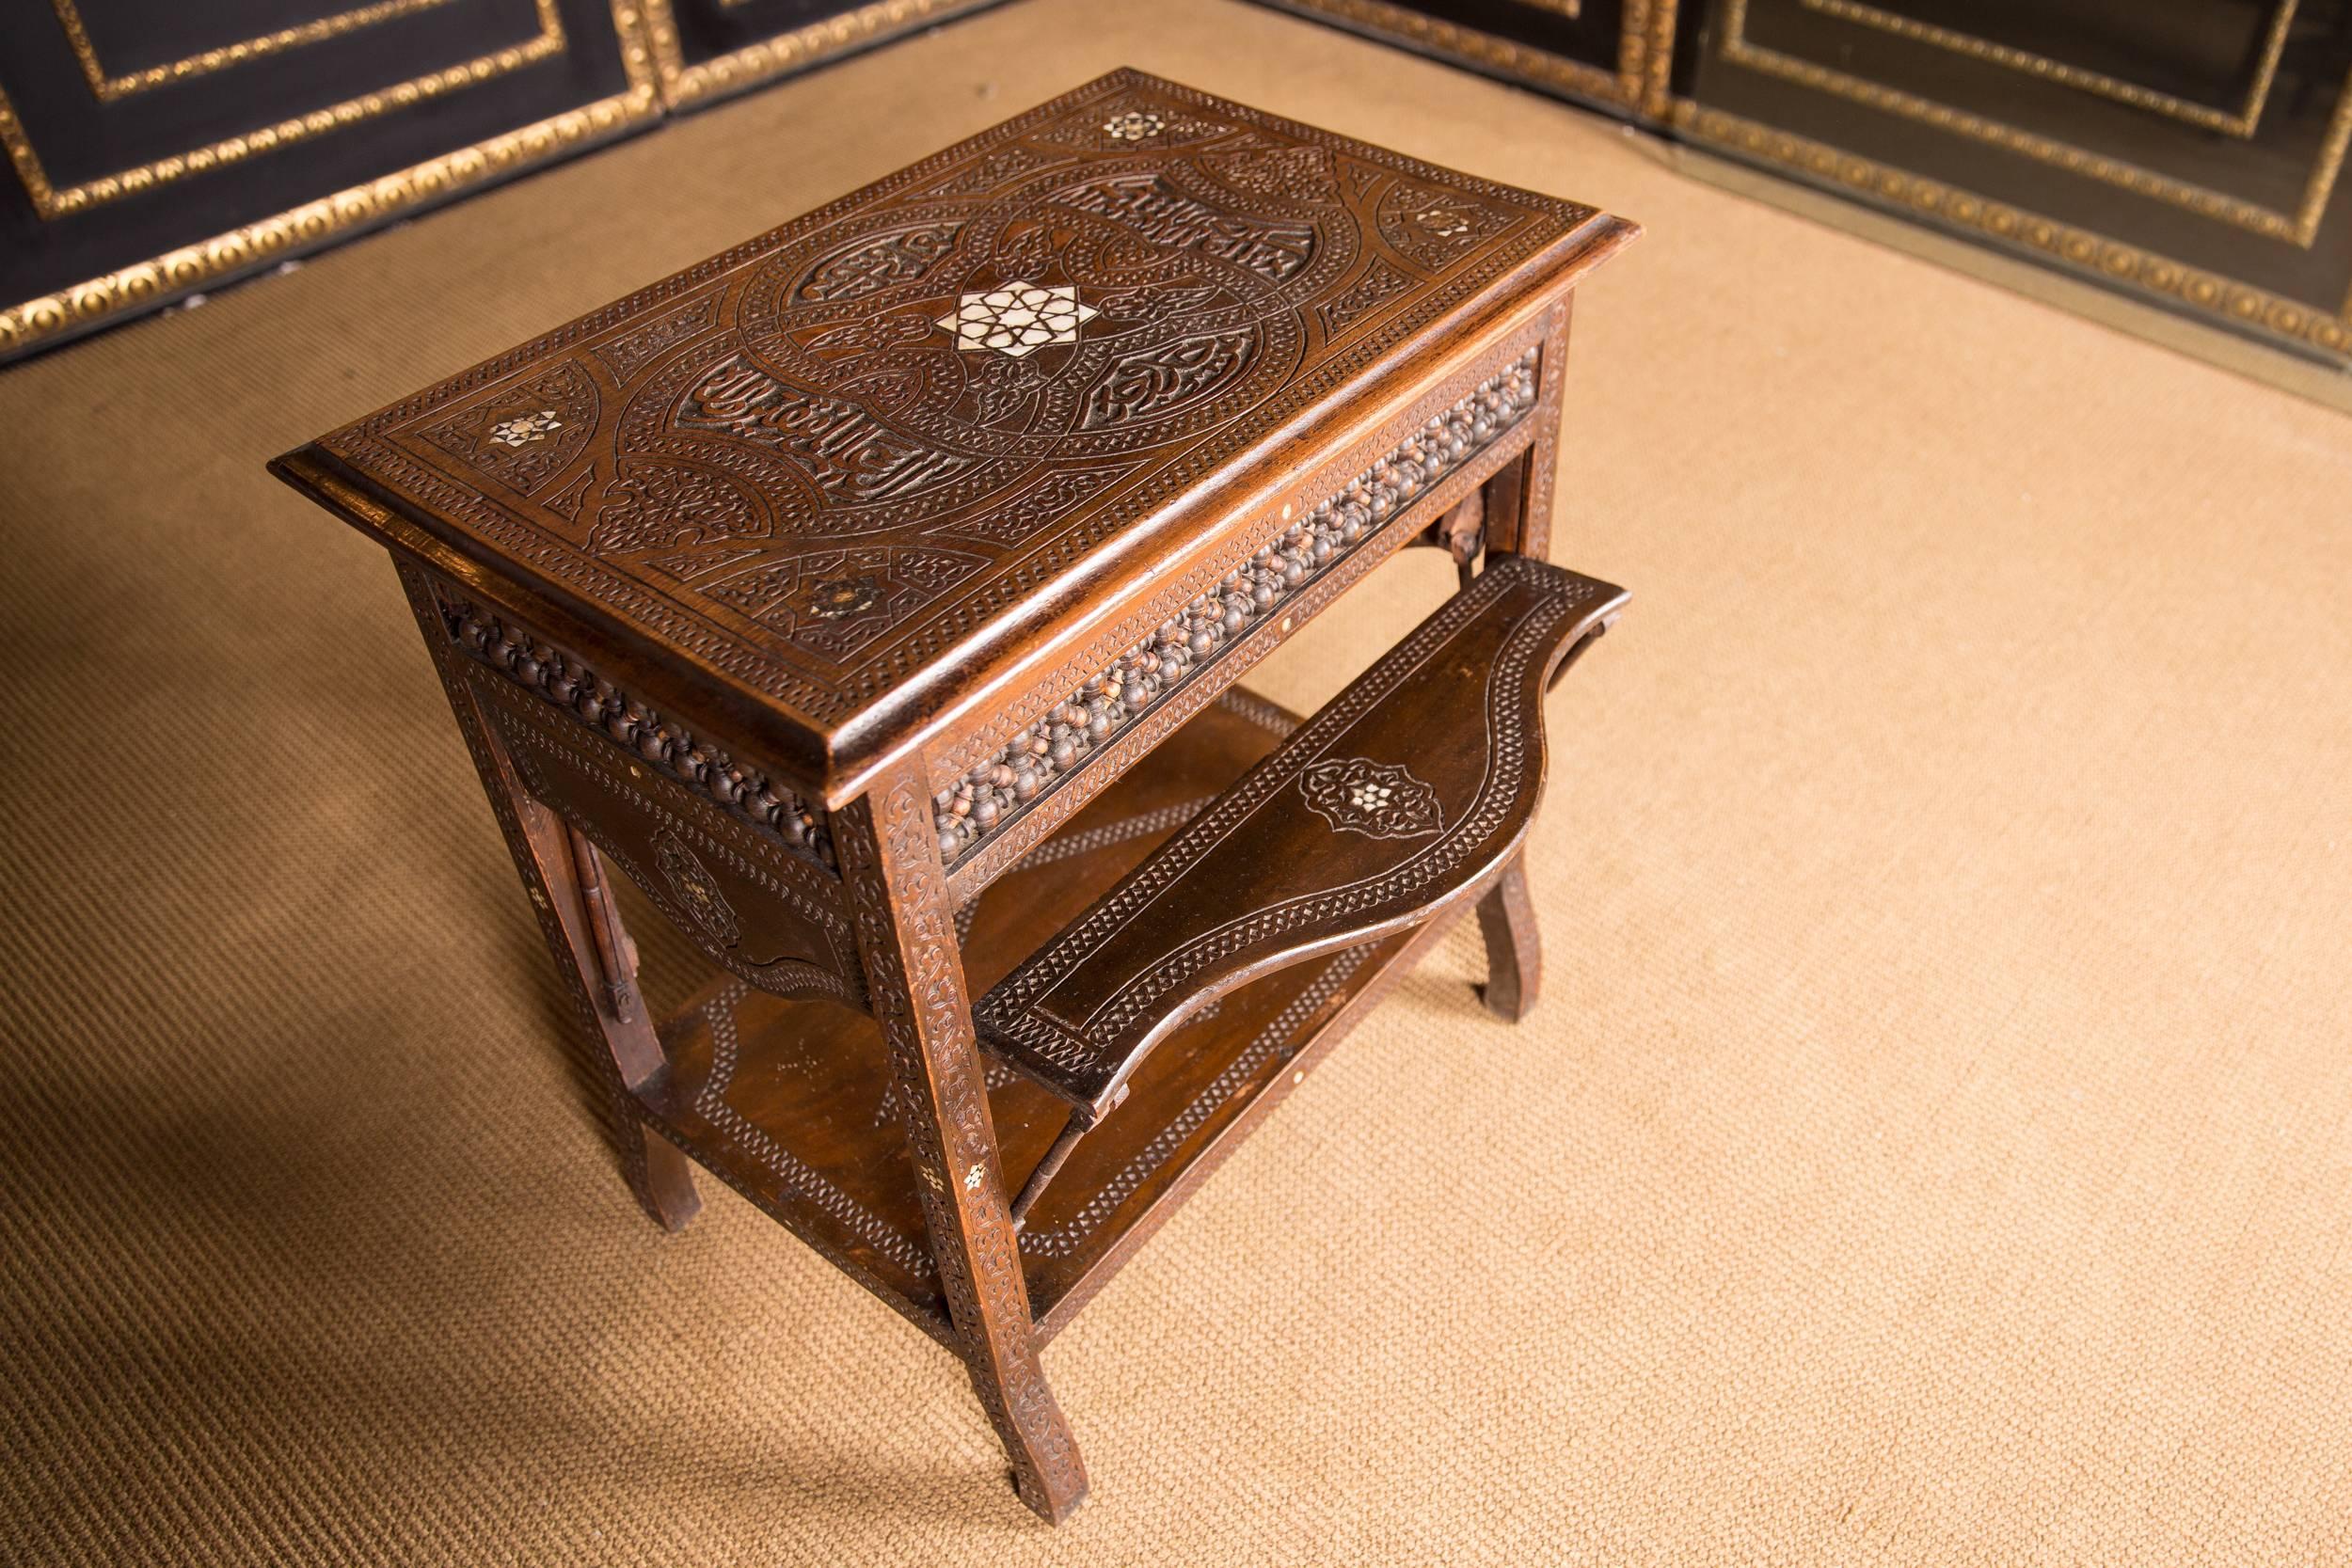 Islamic 19th Century, Oriental Table with Inlaid Marakesch, circa 1900 For Sale